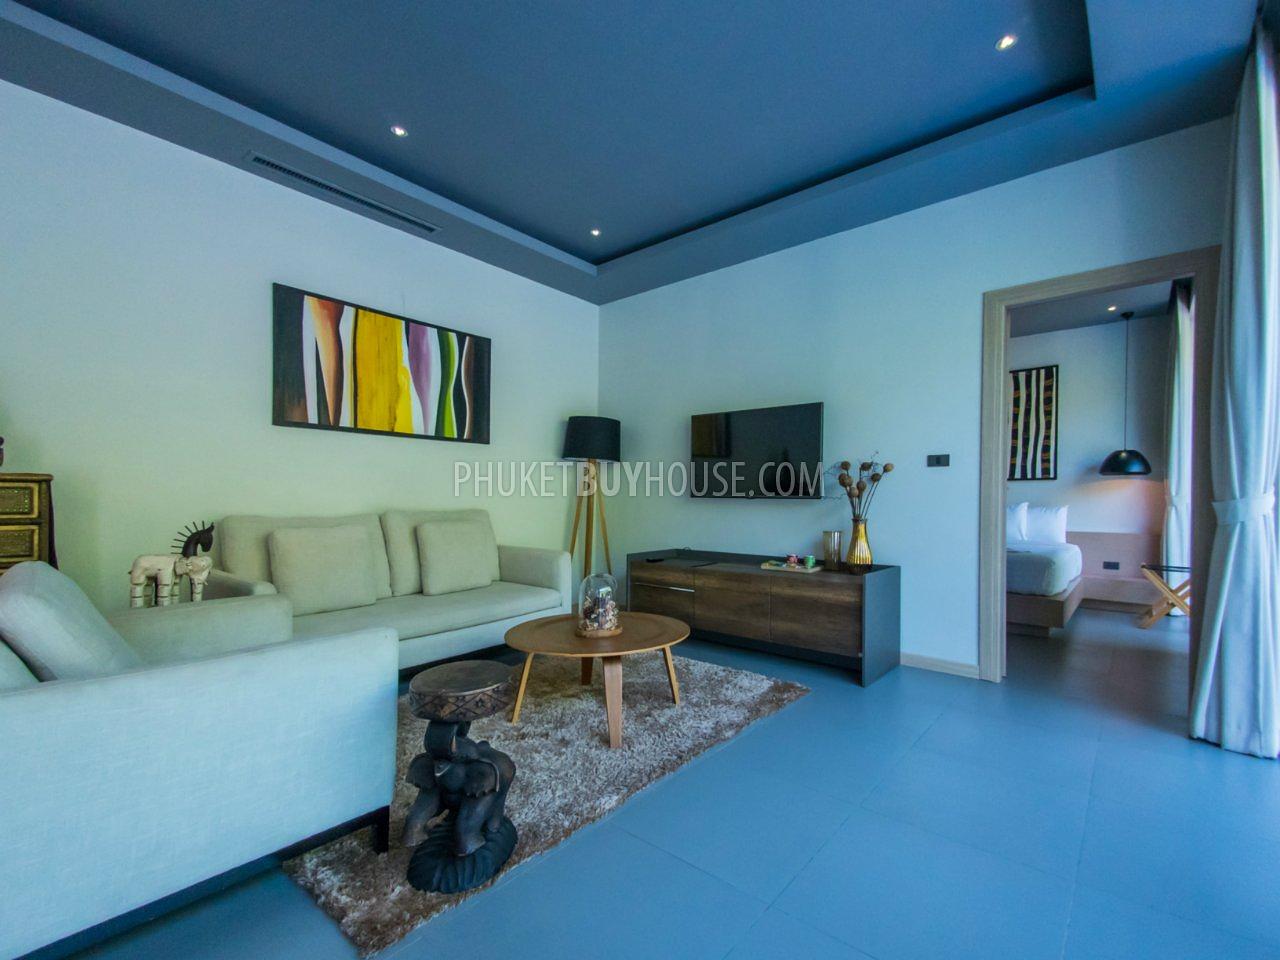 LAY4524: Tropical Modern Villa with 3 bedrooms in Layan. Photo #22